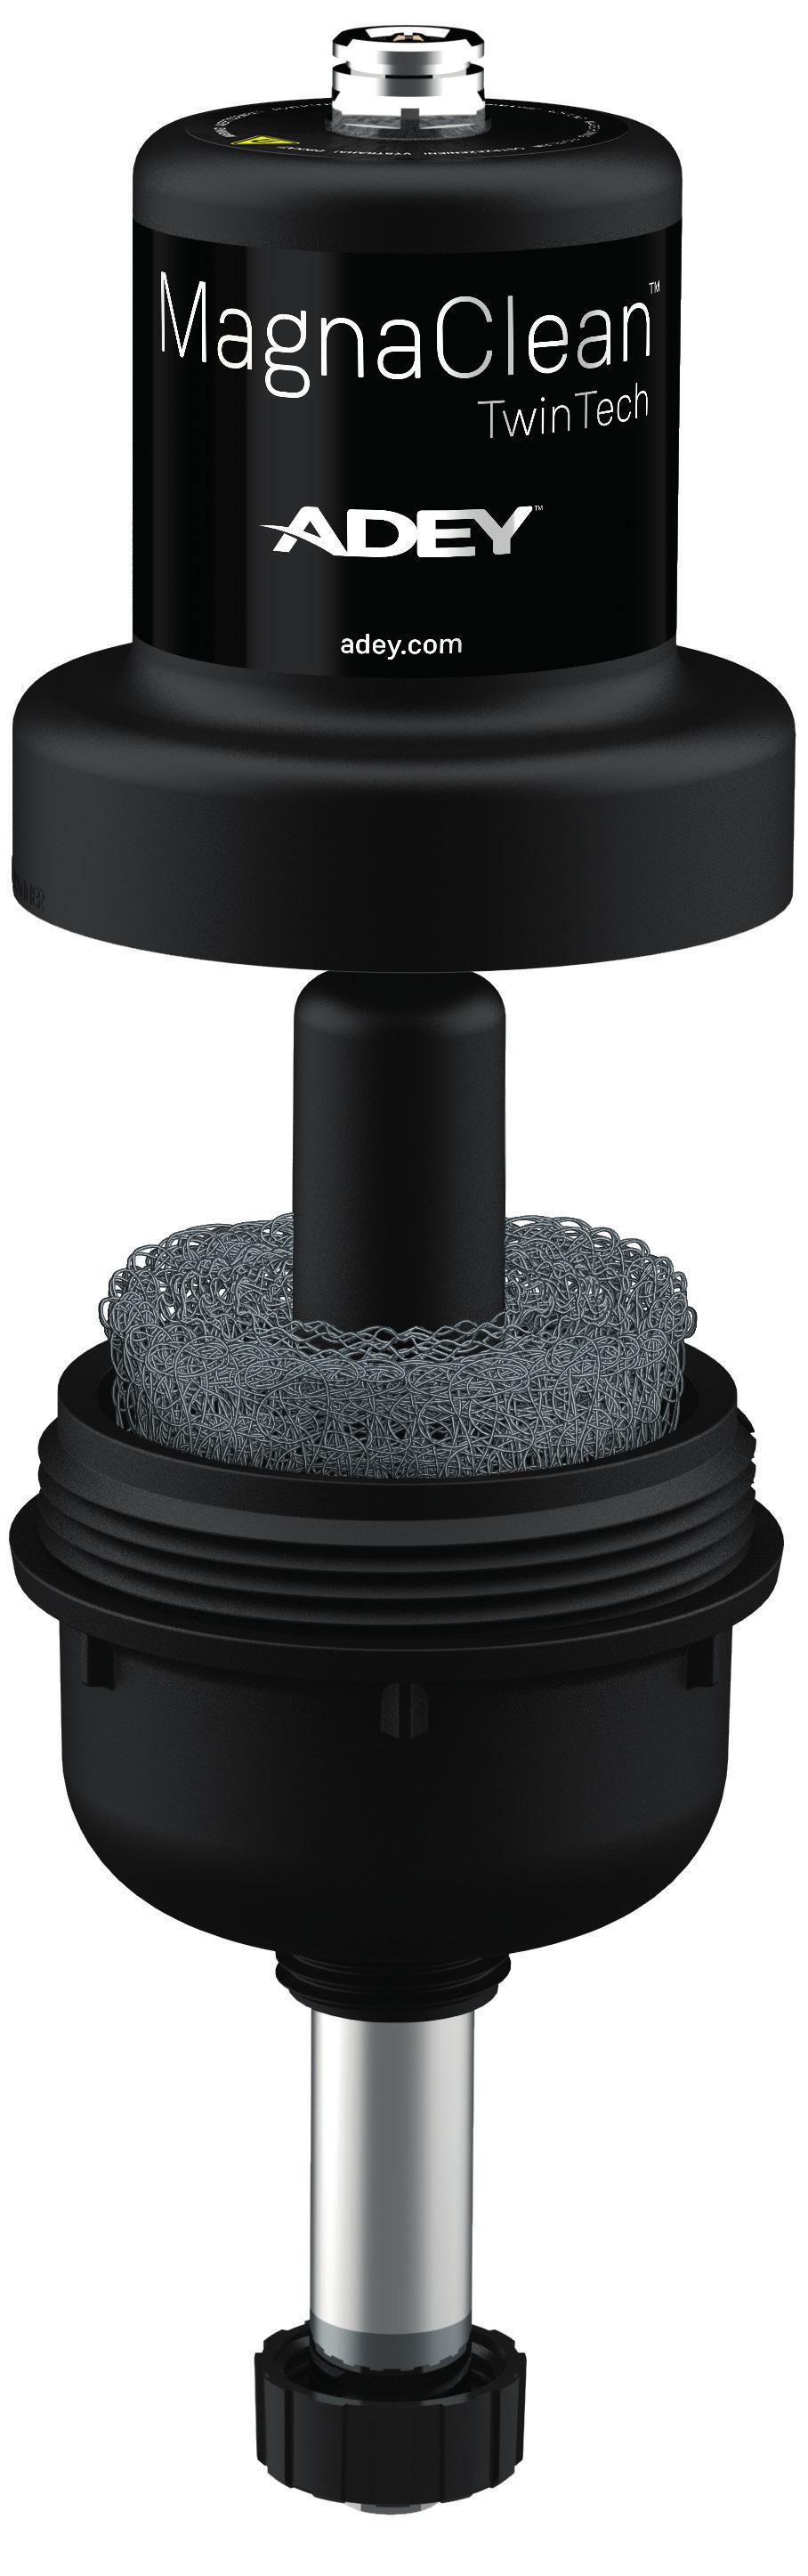 MagnaClean TwinTech is a powerful dual-action filter capturing magnetic and non-magnetic debris as well as biological films. Specifically designed for use with underfloor heating systems.